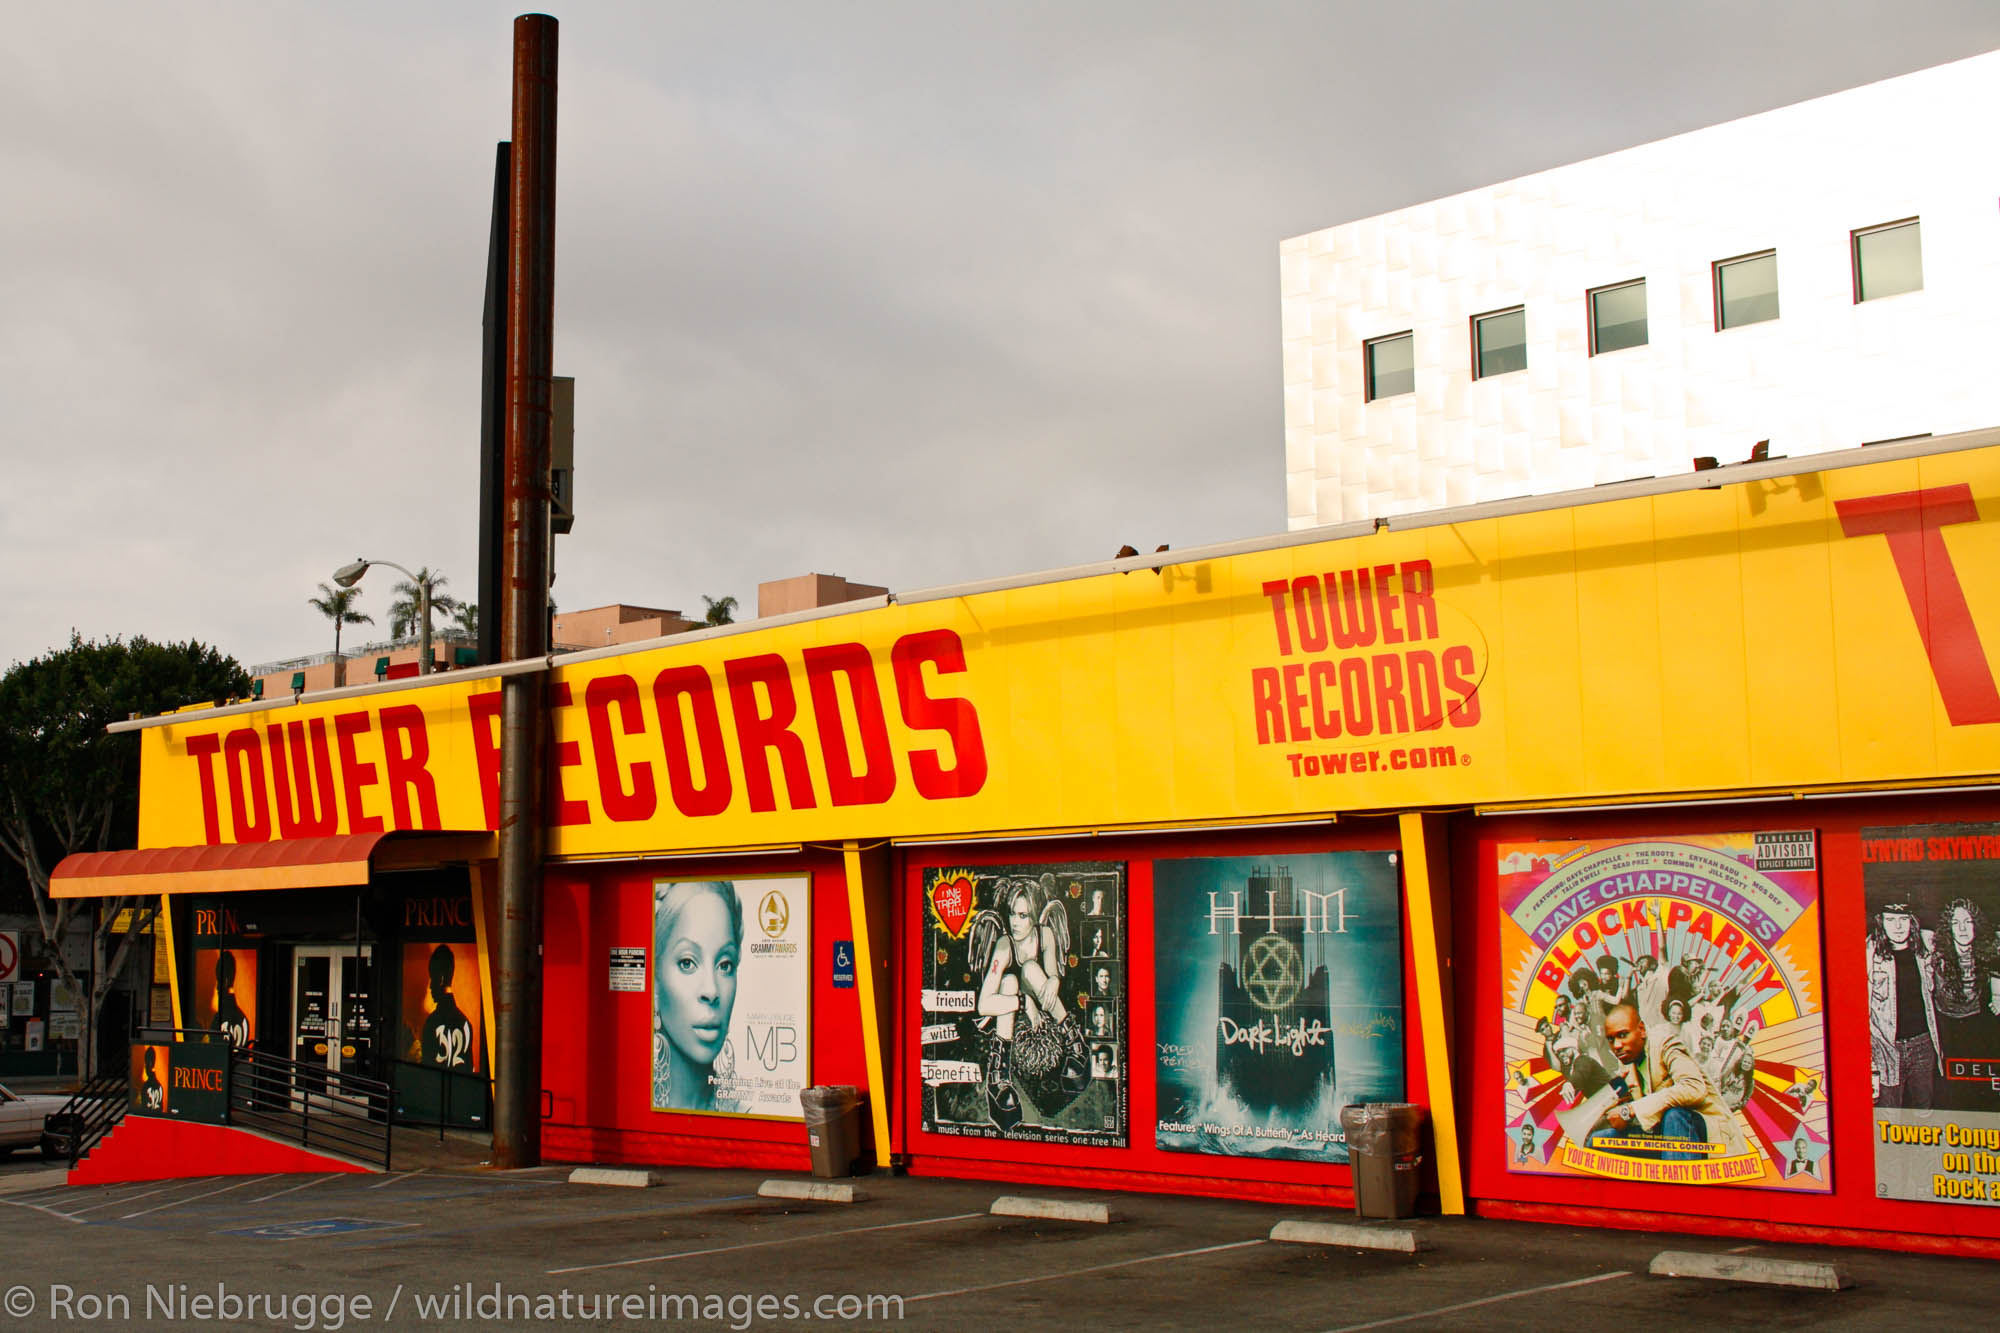 Tower Records on Sunset Boulevard, Hollywood, Los Angeles, California.